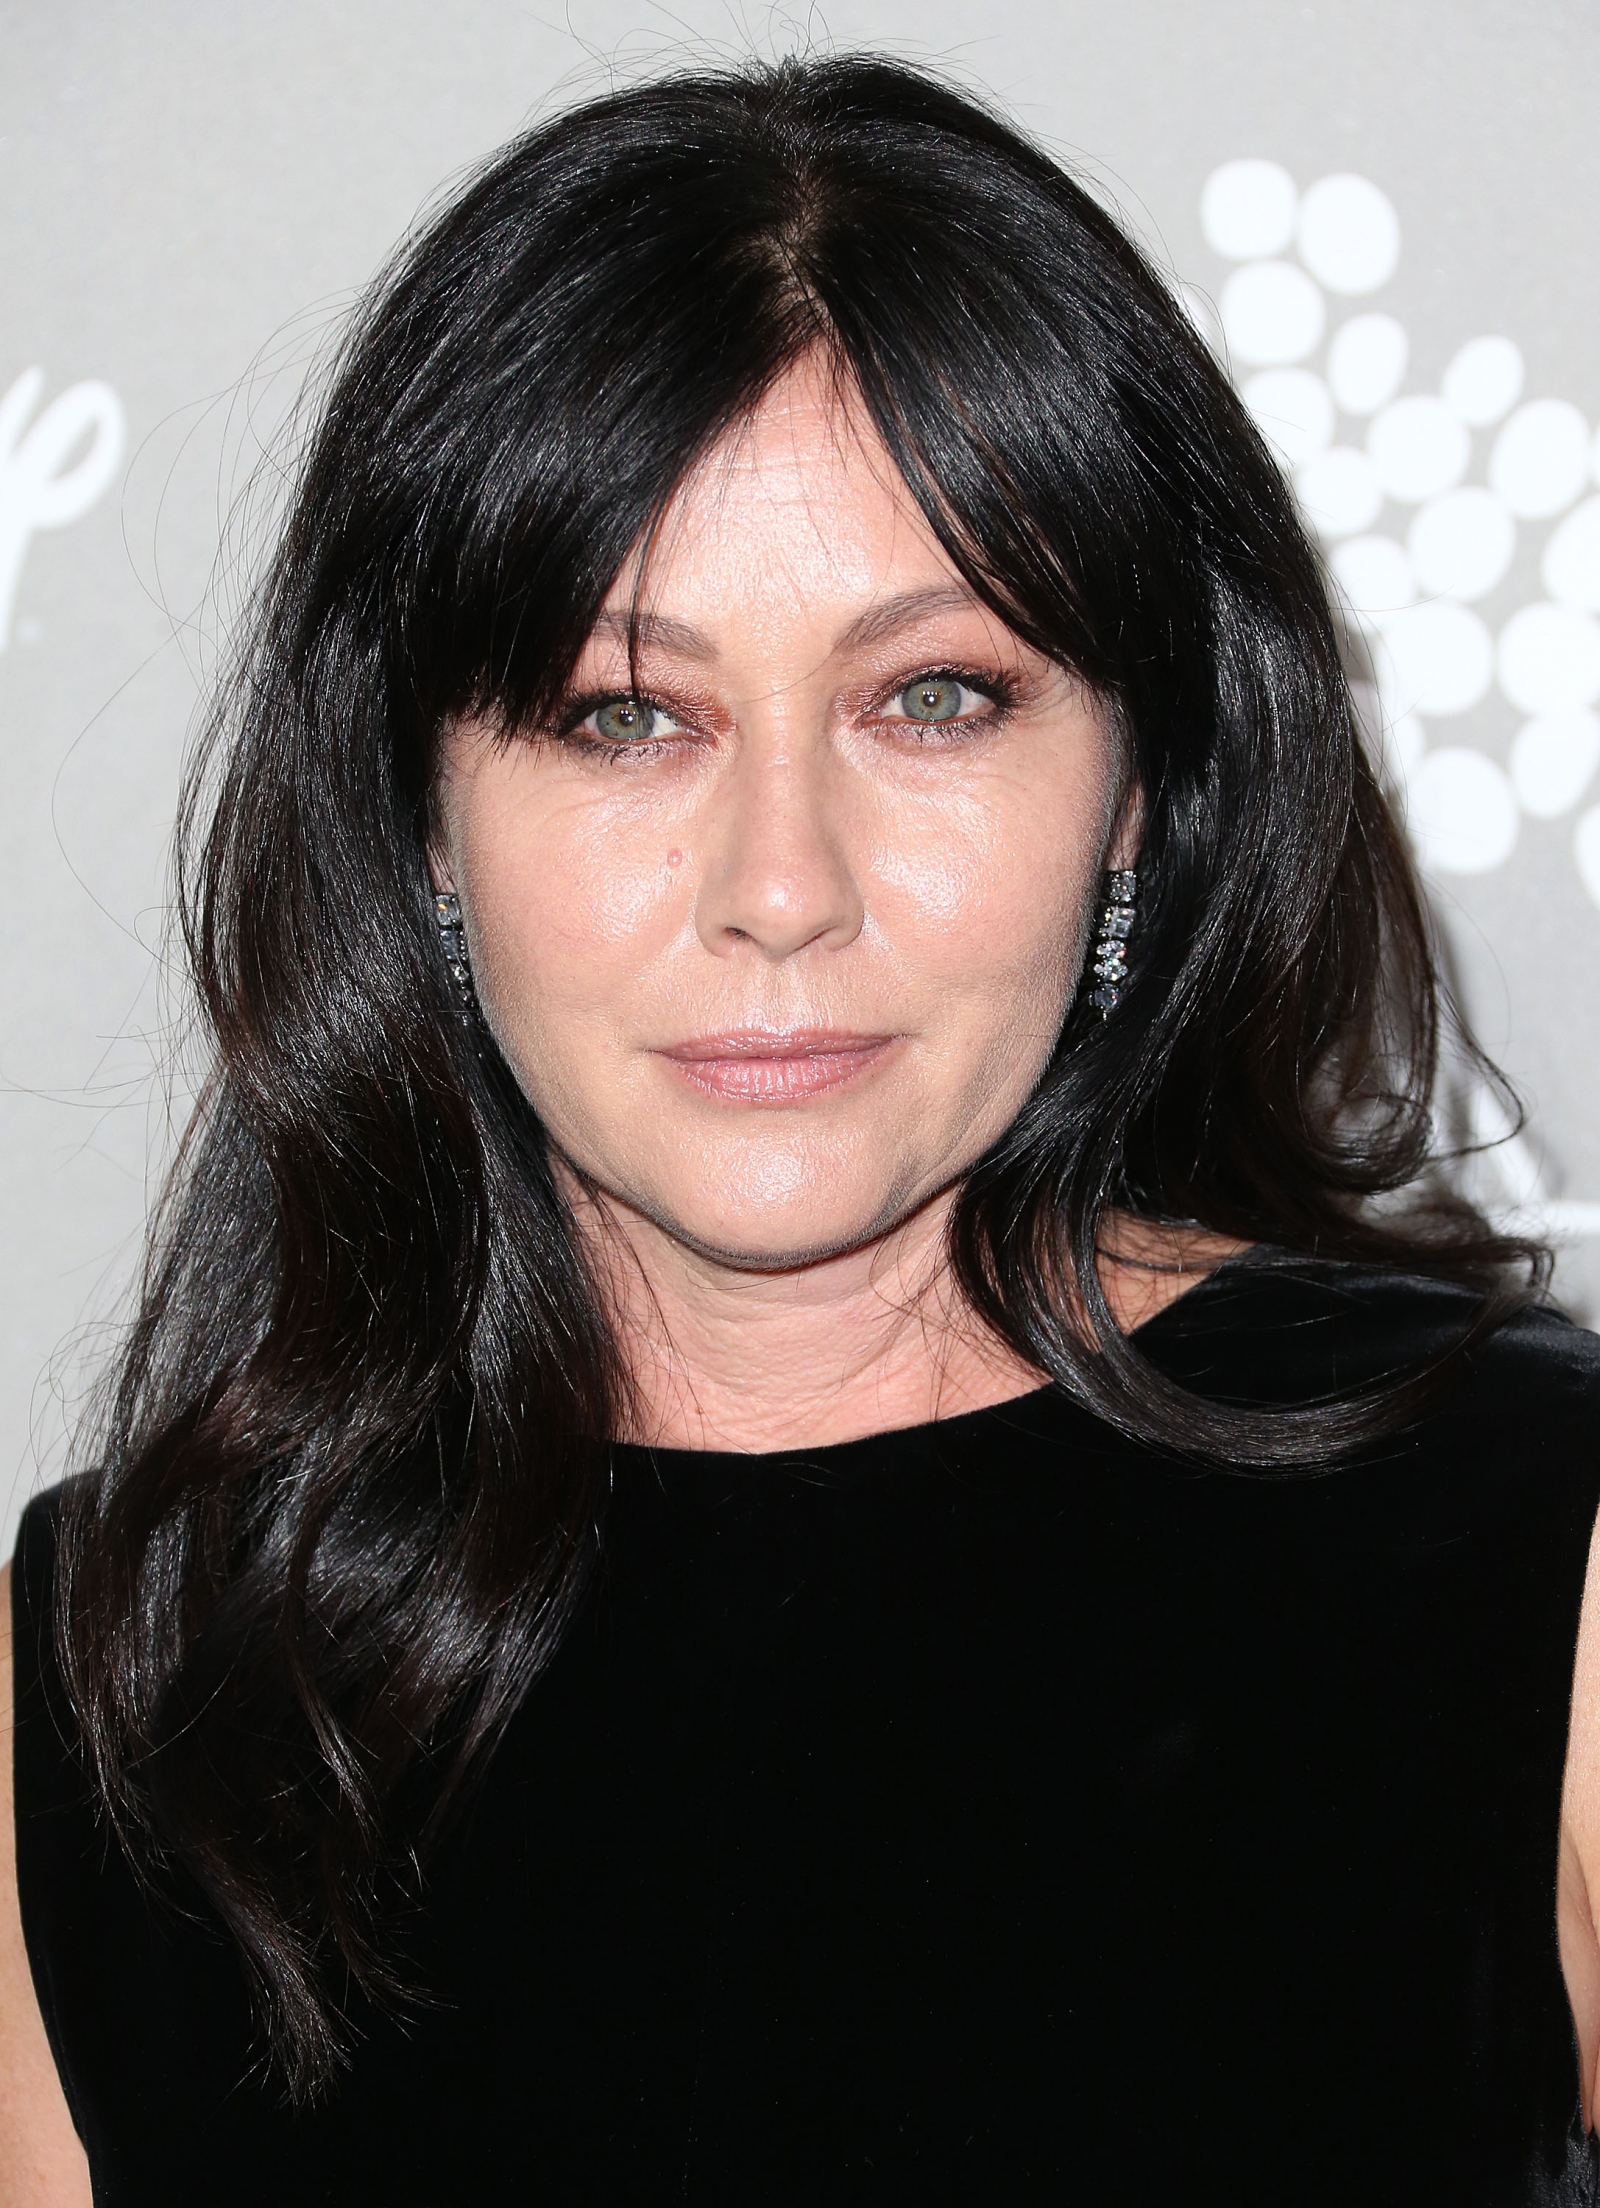 Shannen Doherty: Former Charmed actress reveals 'breast cancer has spread'